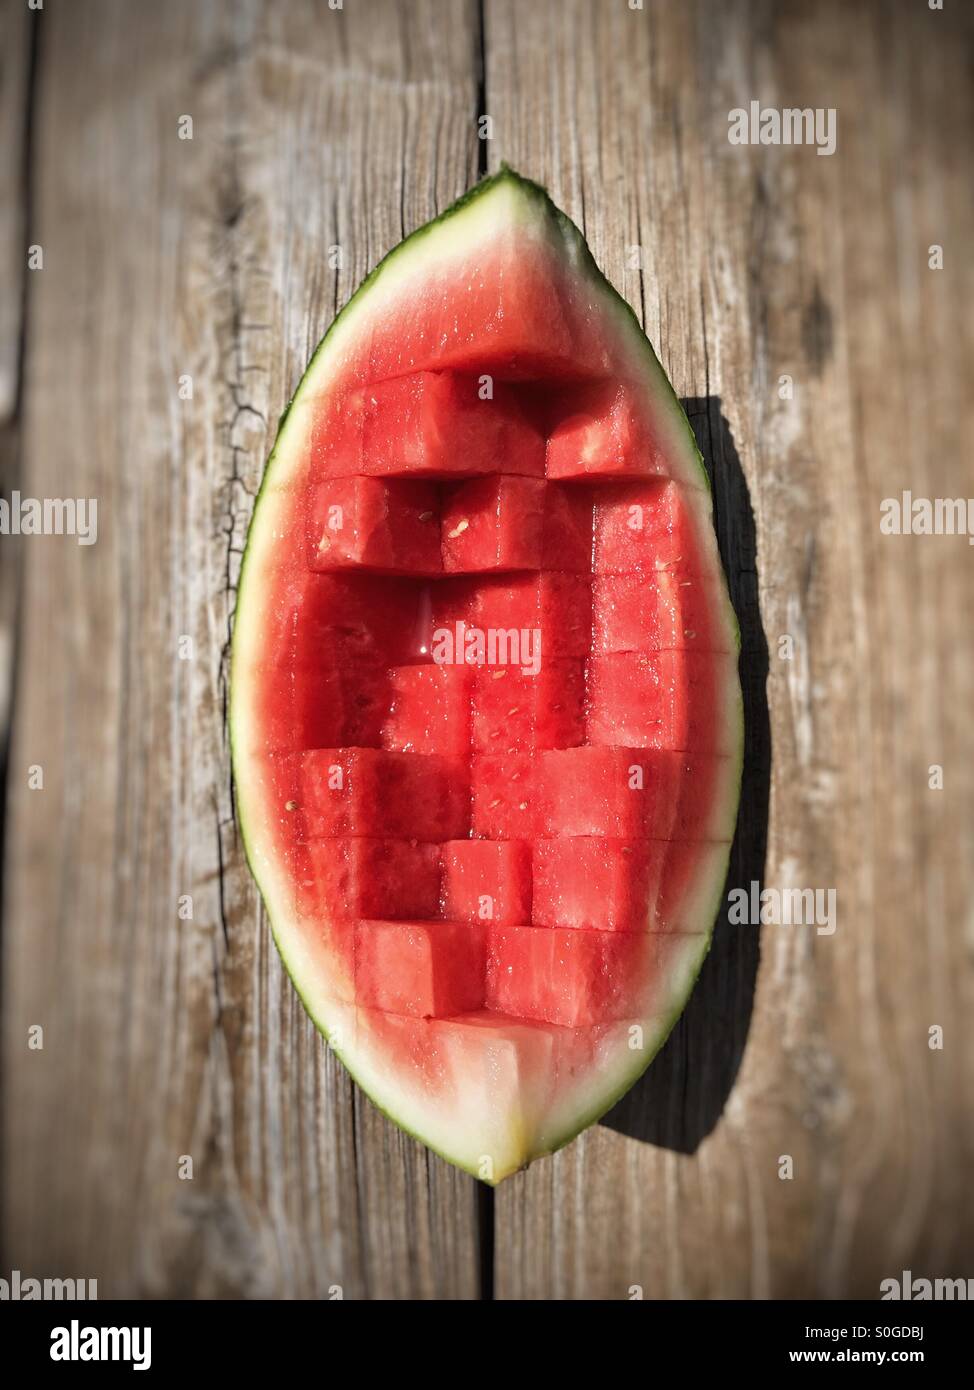 Quarter of a watermelon sliced into cubes Stock Photo